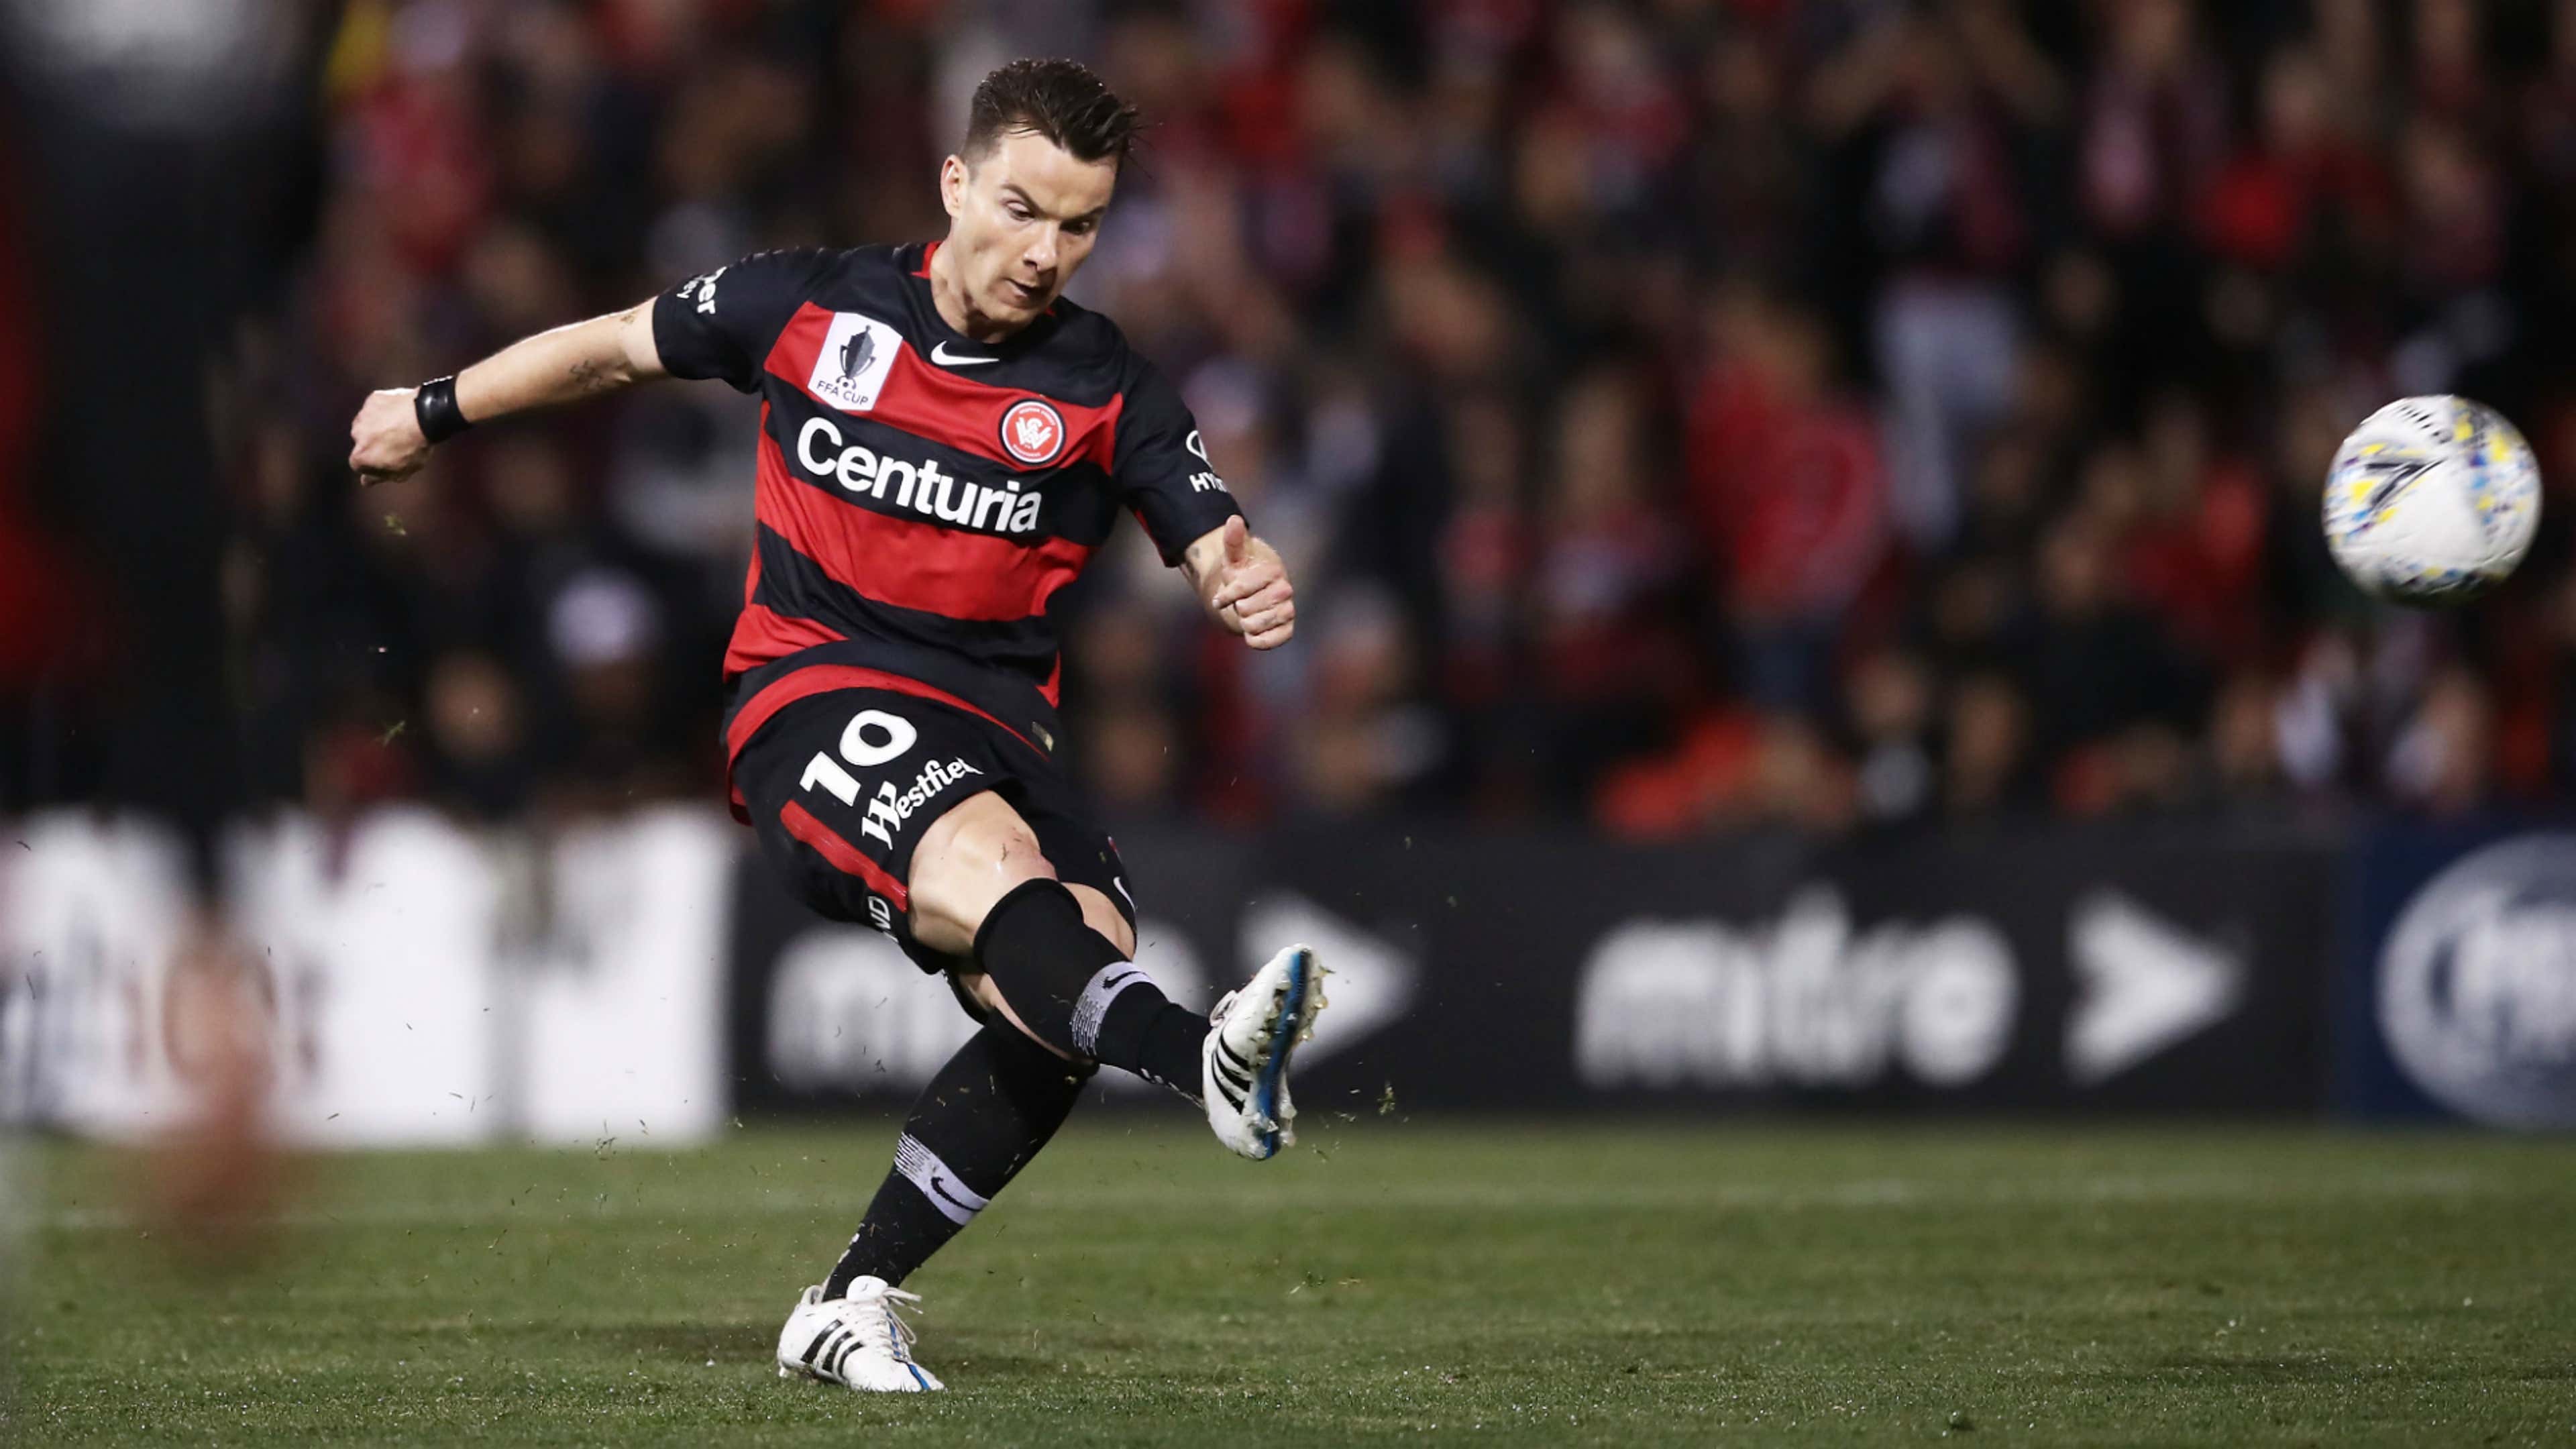 Western Sydney Wanderers FC - Bringing back the red and white